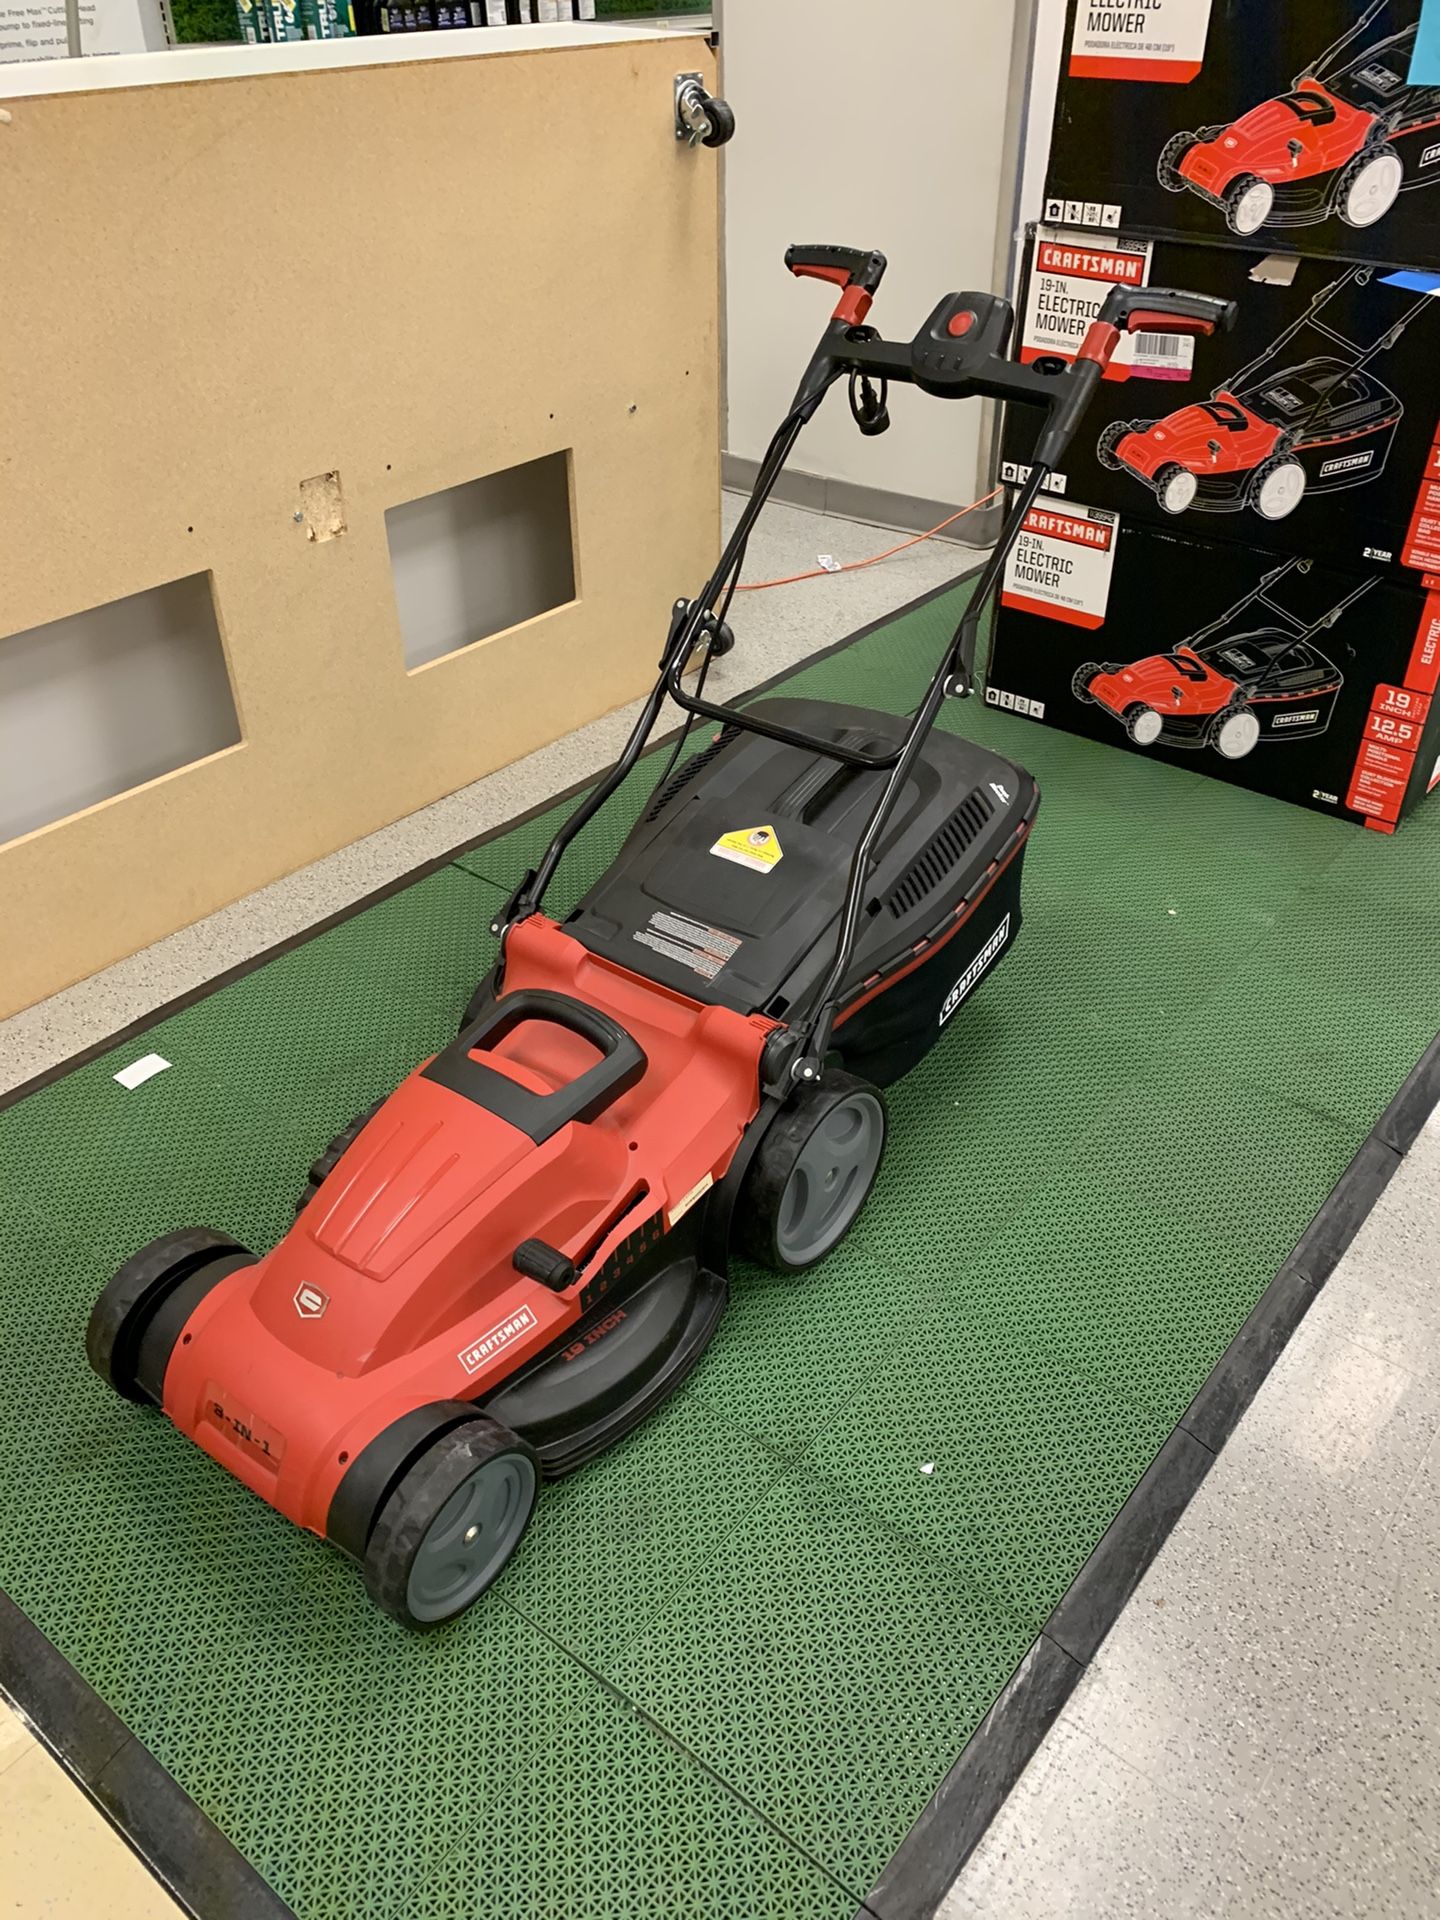 Craftsman Electric Lawn Mower BRAND NEW IN PACKAGING